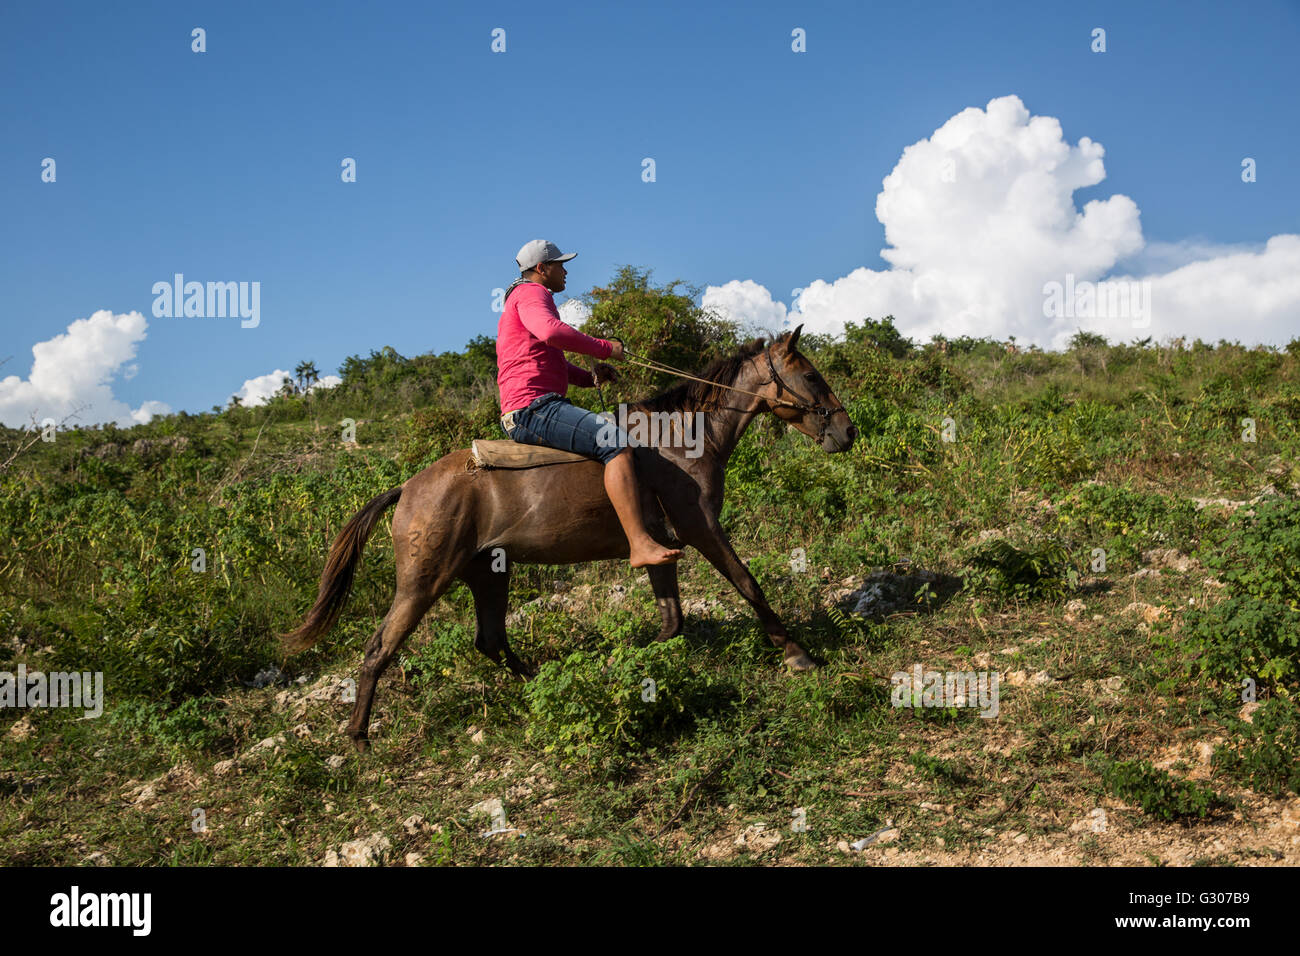 Man riding horse without saddle in Trinidad, Cuba Stock Photo